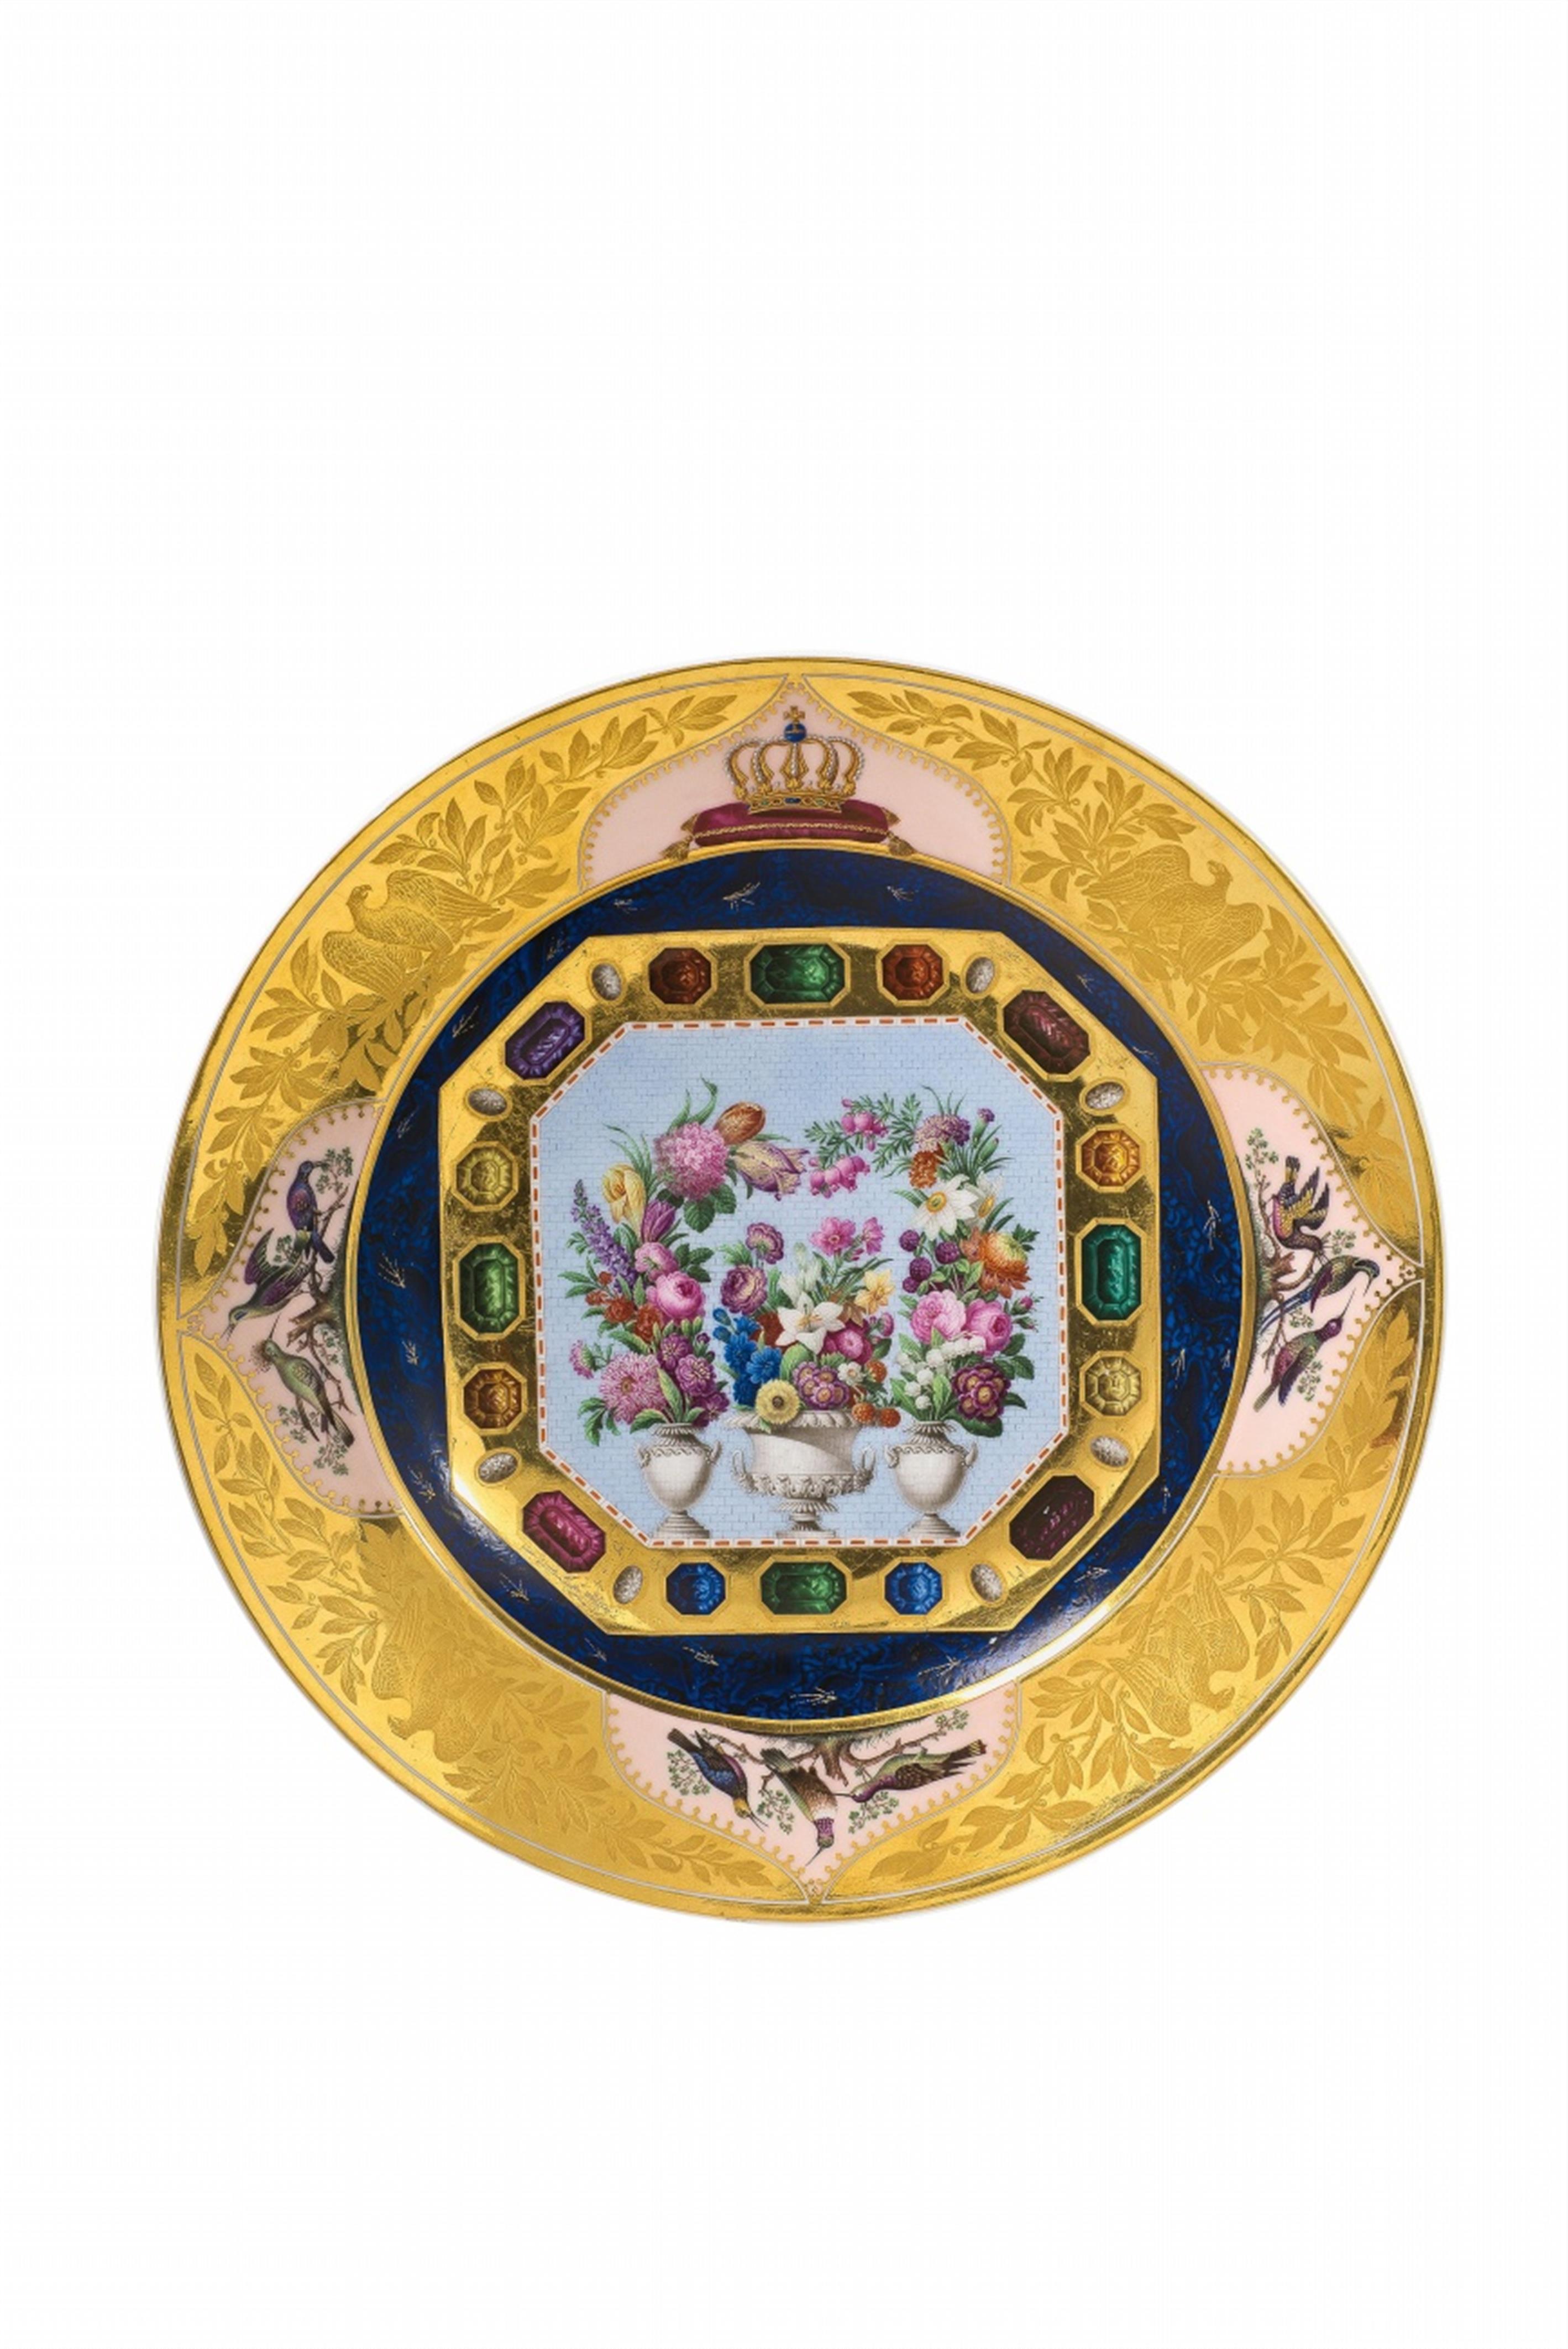 A Berlin KPM painted micromosaic porcelain plate made for the royal court - image-1